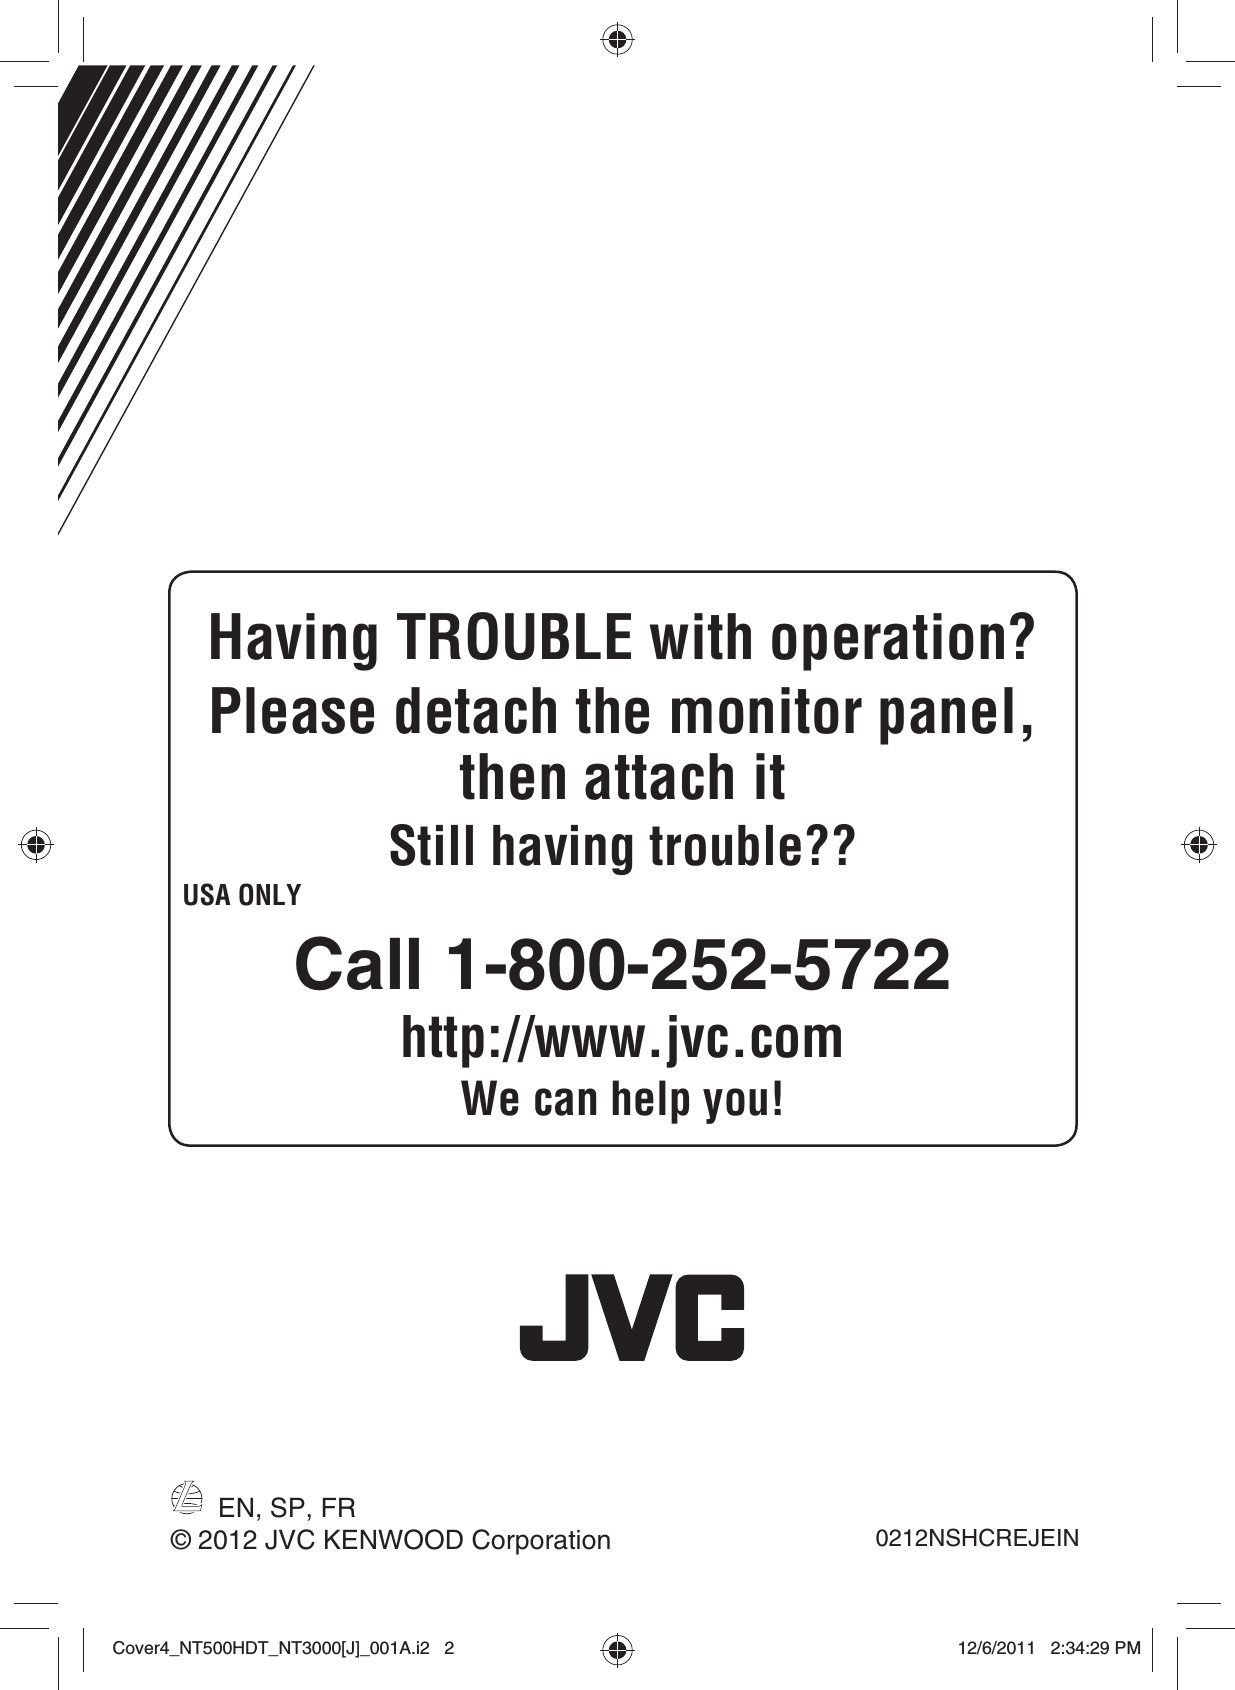 EN, SP, FR0212NSHCREJEIN© 2012 JVC KENWOOD CorporationHaving TROUBLE with operation?Please detach the monitor panel, then attach itStill having trouble??USA ONLYCall 1-800-252-5722http://www.jvc.comWe can help you!Cover4_NT500HDT_NT3000[J]_001A.i2   2Cover4_NT500HDT_NT3000[J]_001A.i2   212/6/2011   2:34:29 PM12/6/2011   2:34:29 PM